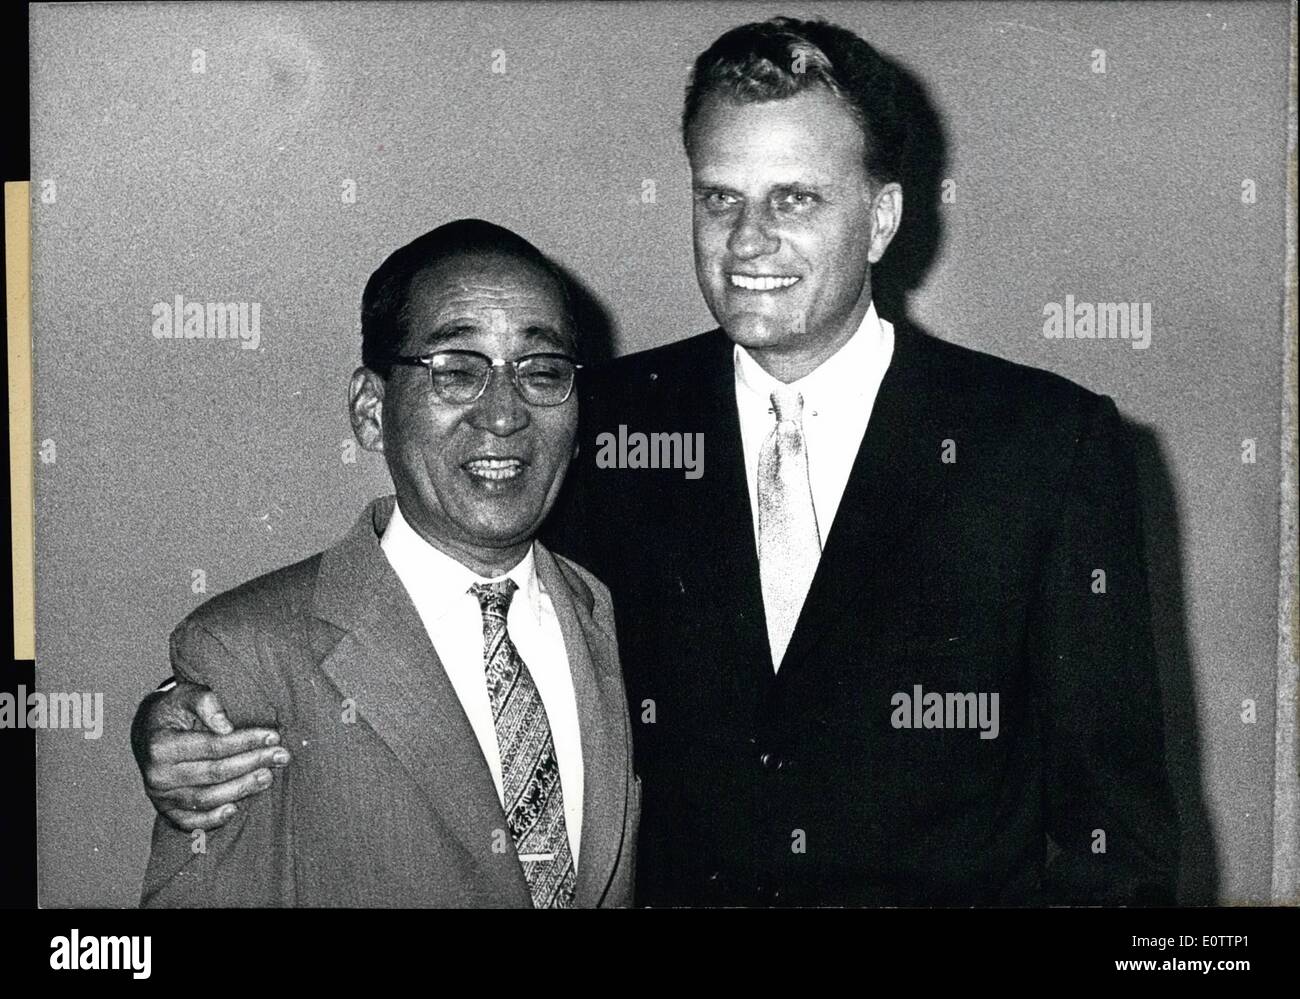 Sep. 09, 1960 - Two friends meeting at Berlin: Today two friends Capt. Mitsuo Fuchida - left - the man wicj was ordered 19 year Stock Photo